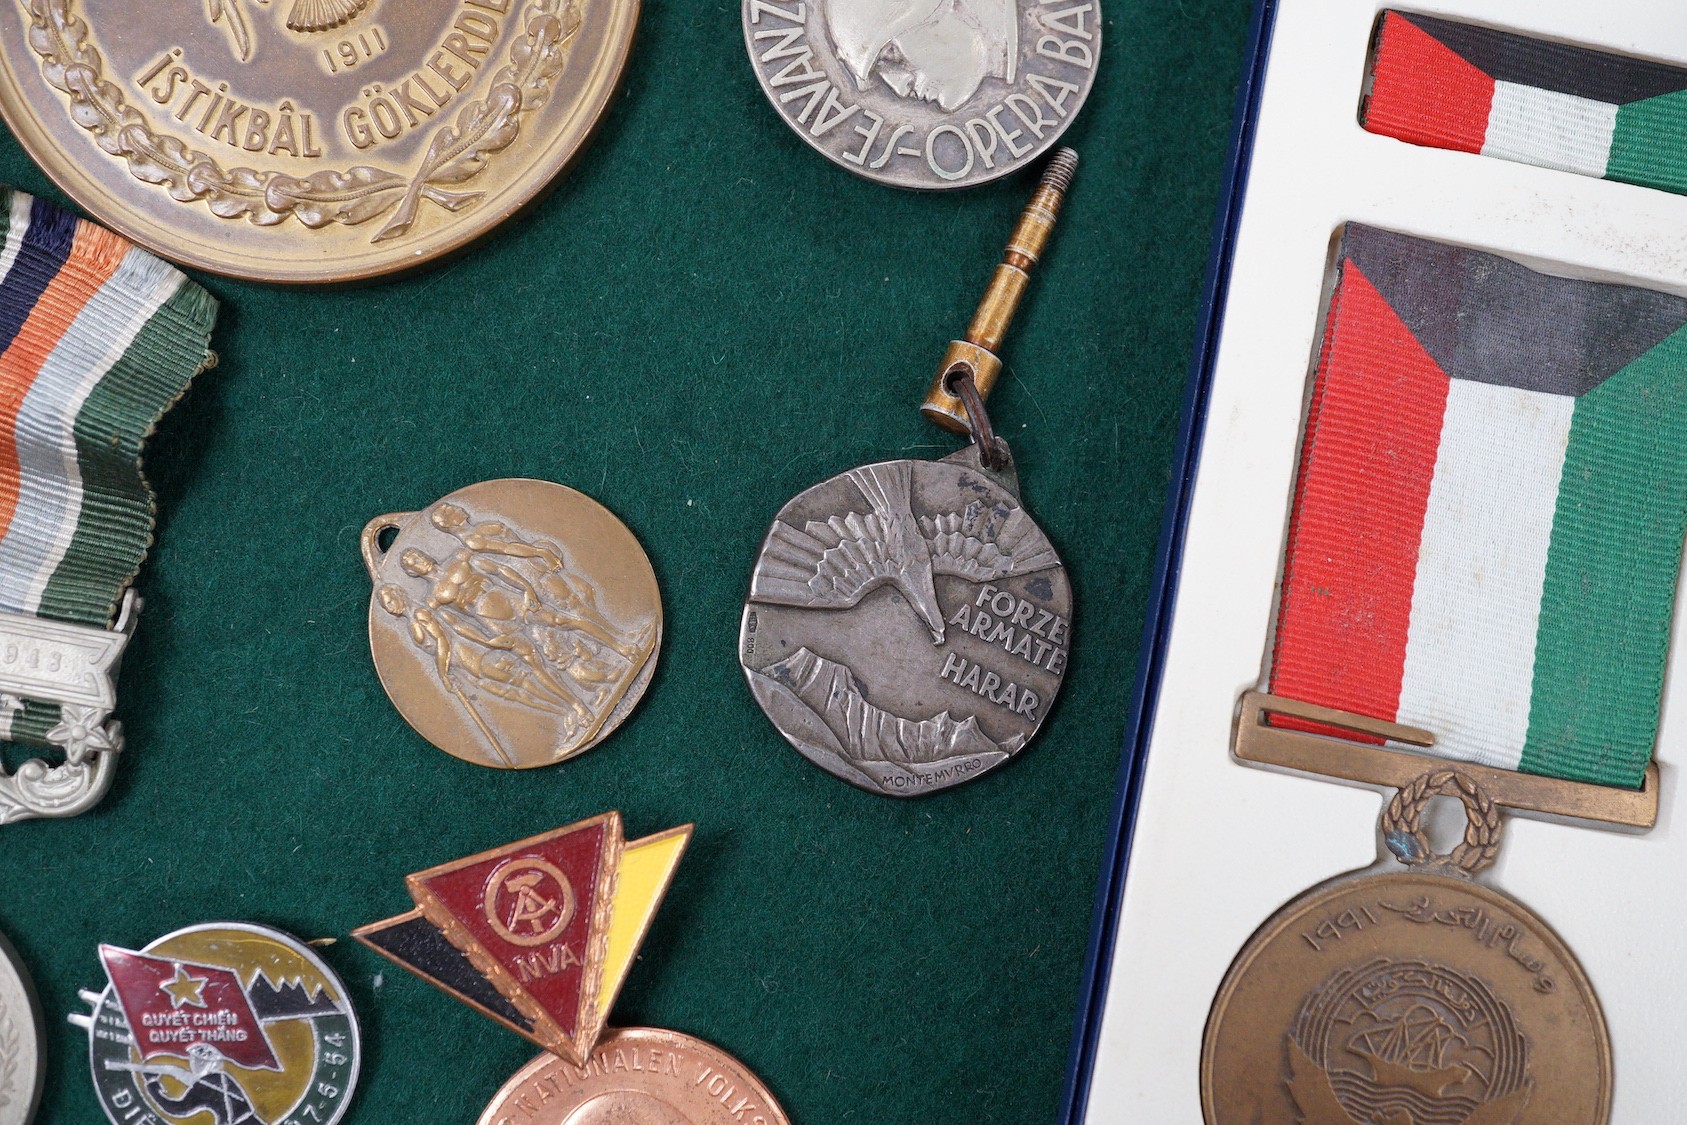 Foreign medals - Pakistan GSM with Kashmir 1948 clasp, two Liberation of Kuwait medals, Saudi Arabia and Kuwait issues, East German reserve medal, Italian Ethiopia Campaign 1937 medal, ONB badge and Combattimento medal,